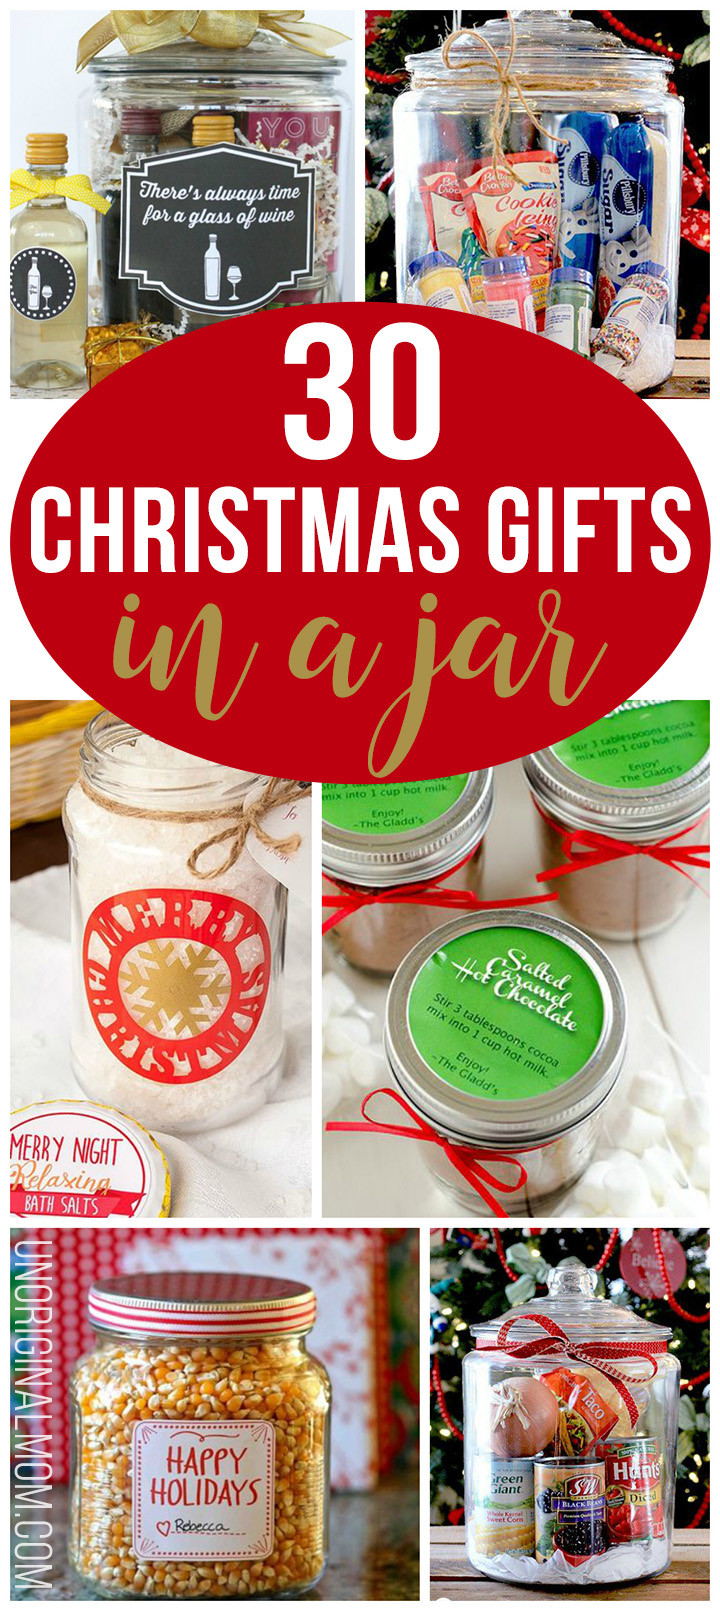 Pinterest Homemade Christmas Gifts
 30 Christmas Gifts in a Jar unOriginal Mom